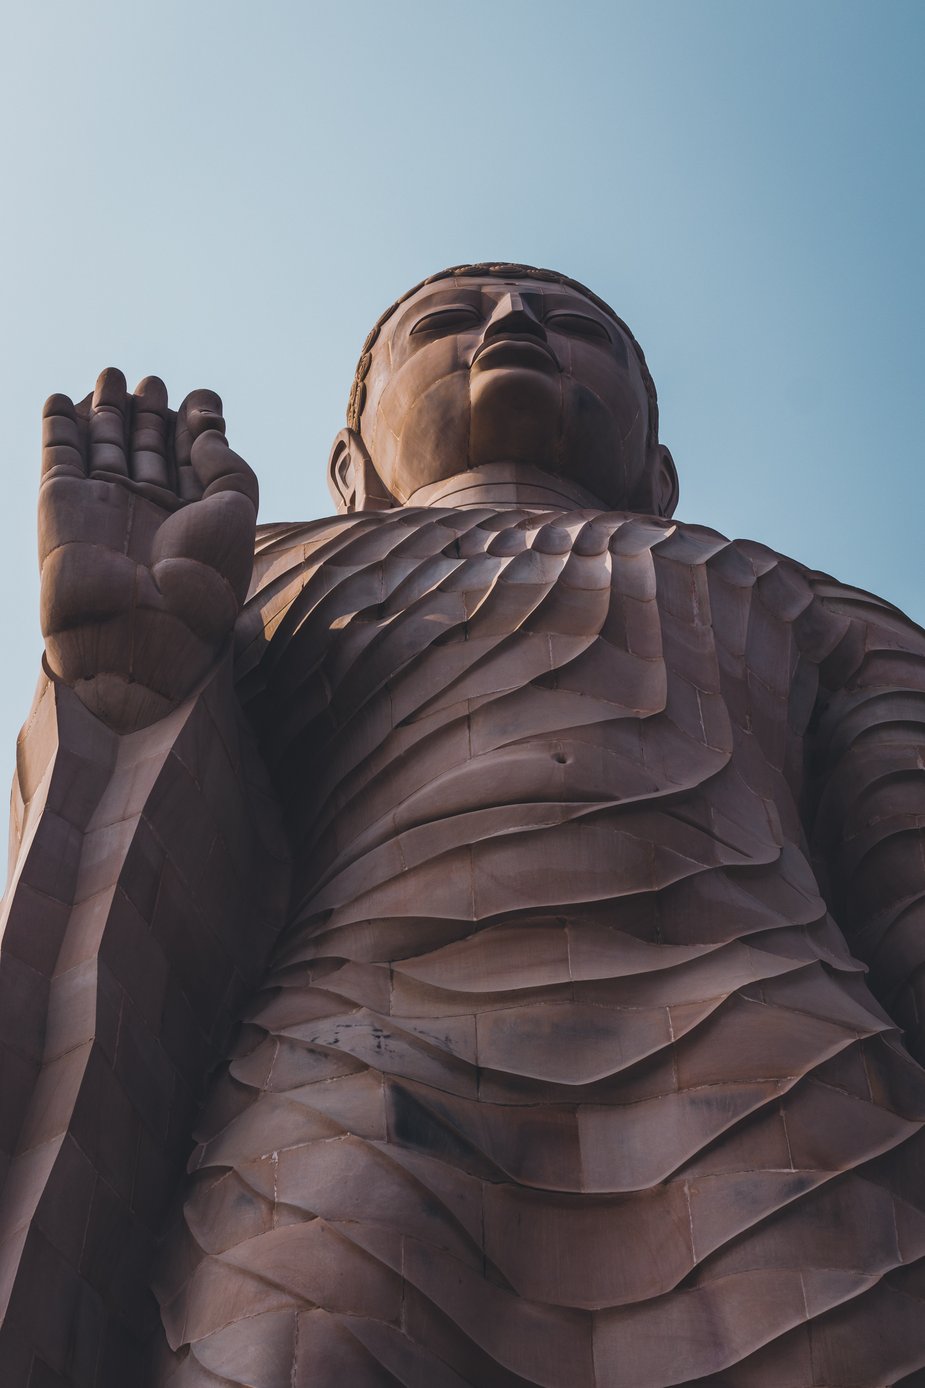 Things to Remember While Placing Your Buddha Statues